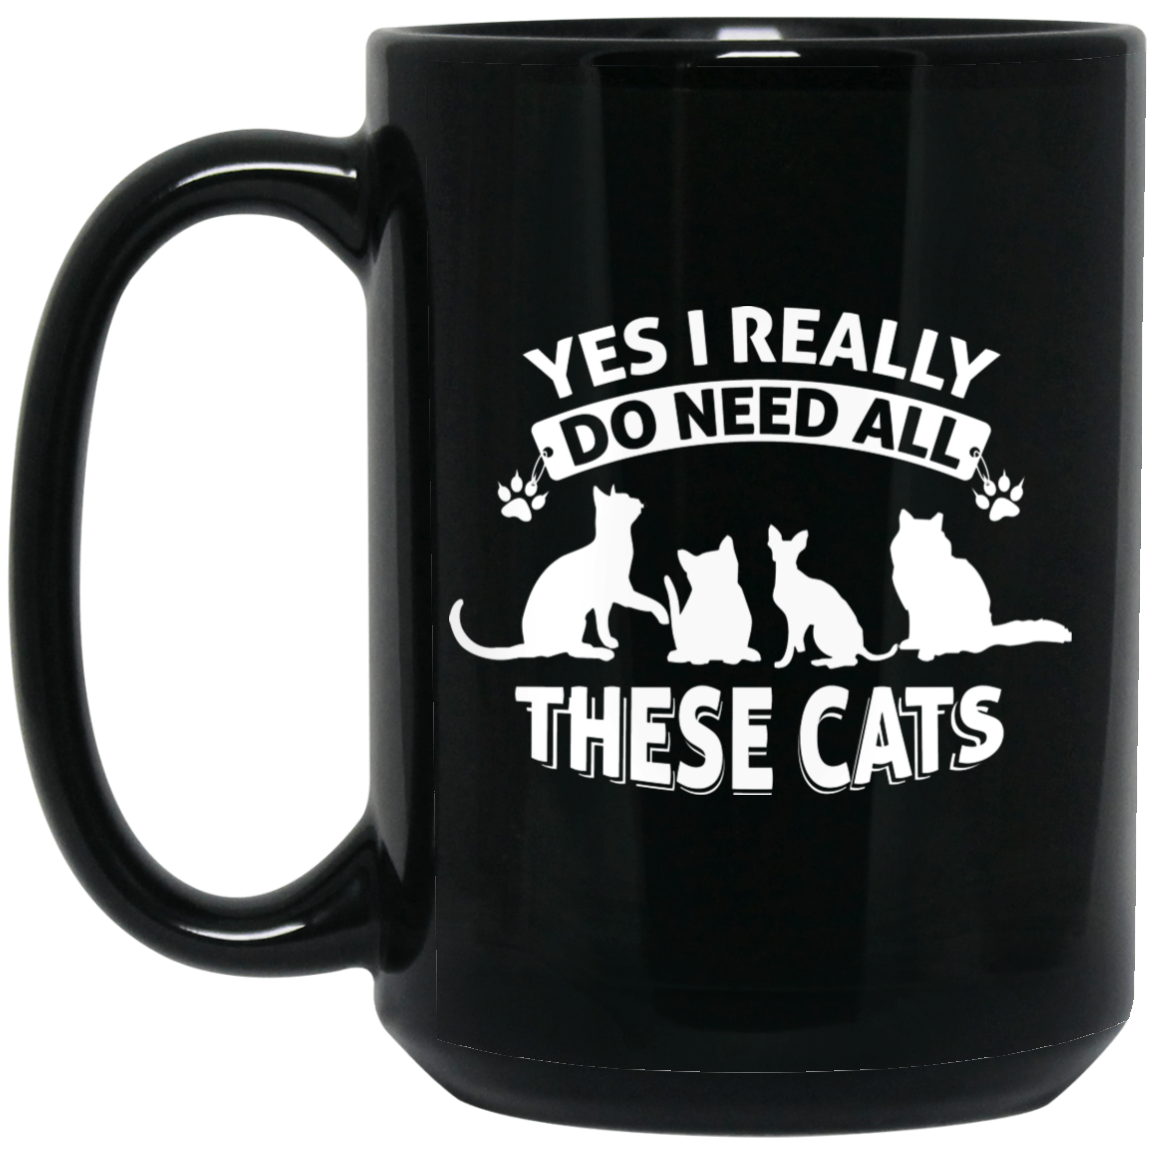 All These Cats - Black Mugs